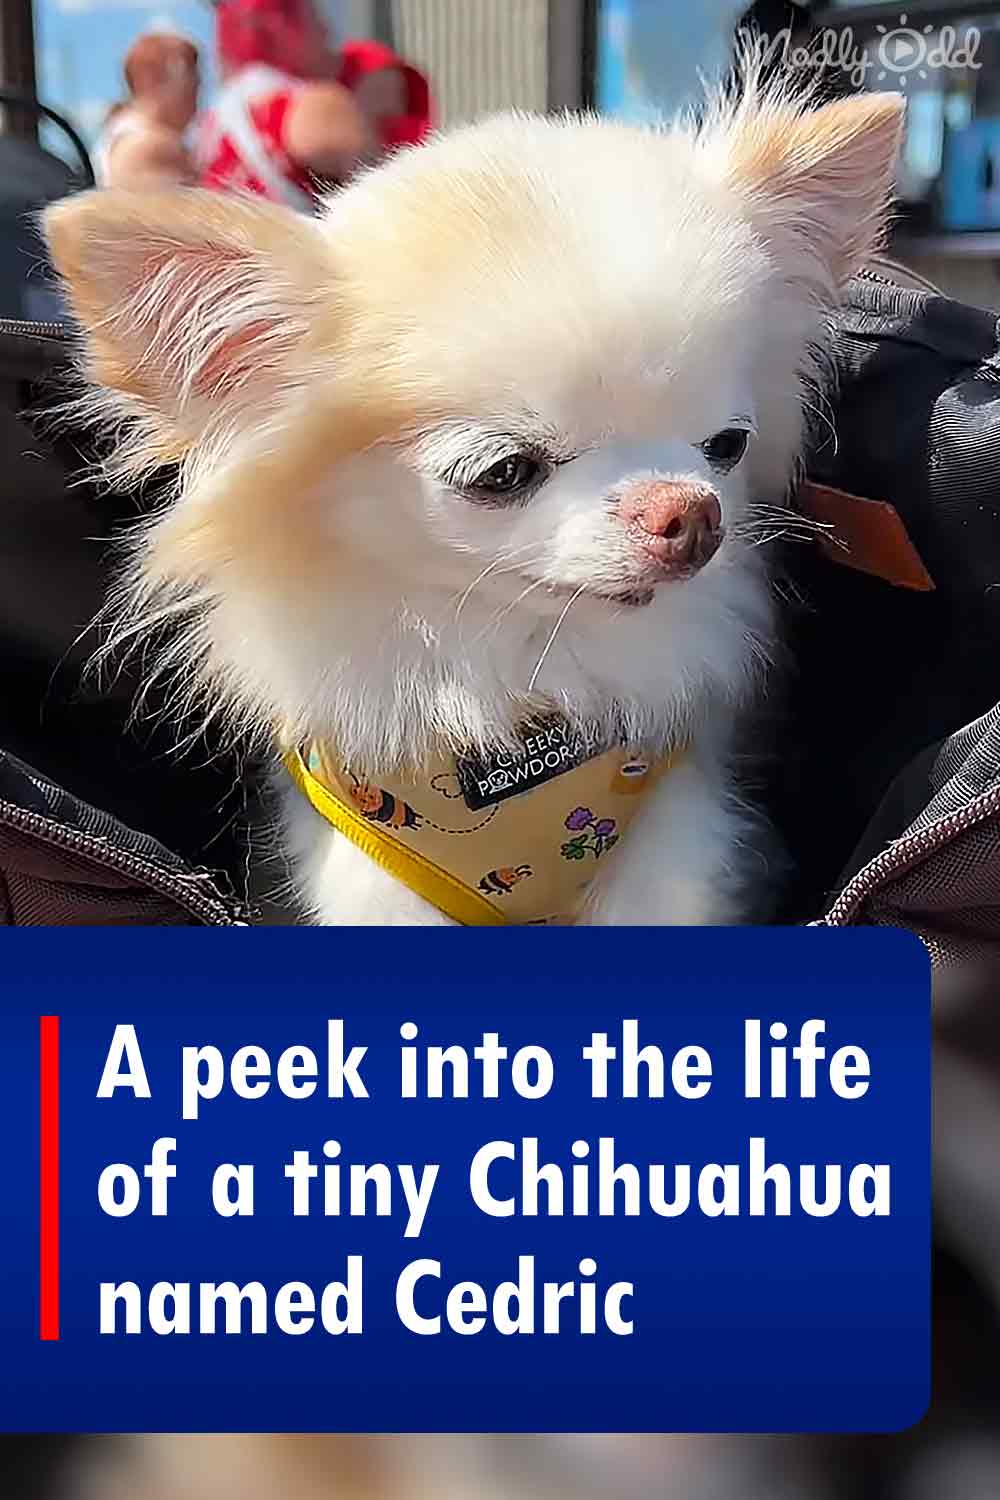 A peek into the life of a tiny Chihuahua named Cedric